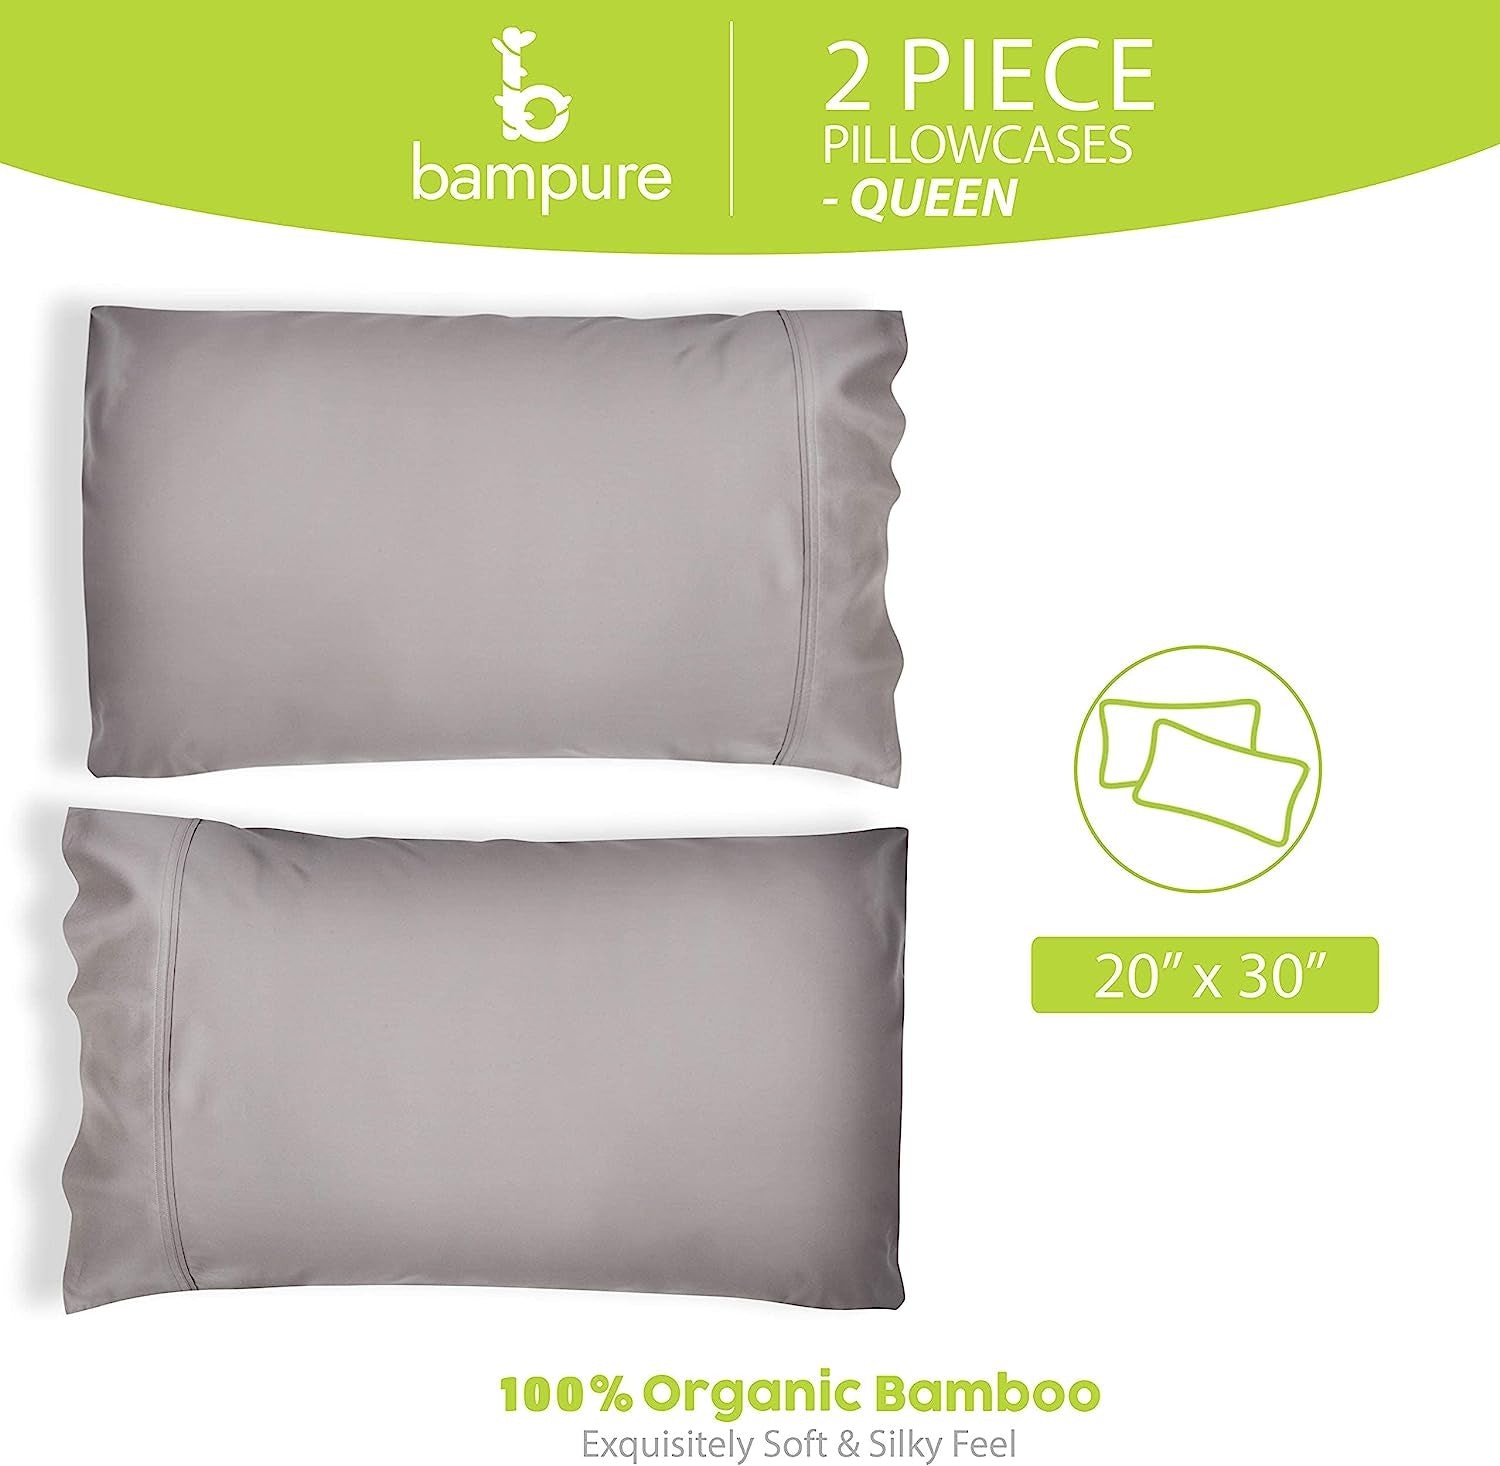 Premium Bamboo-Derived Viscose Pillowcases - Cooling Pillowcases for Hot Sleepers - Set of 2 Queen Size Pillowcases (20X30) - Stone Gray